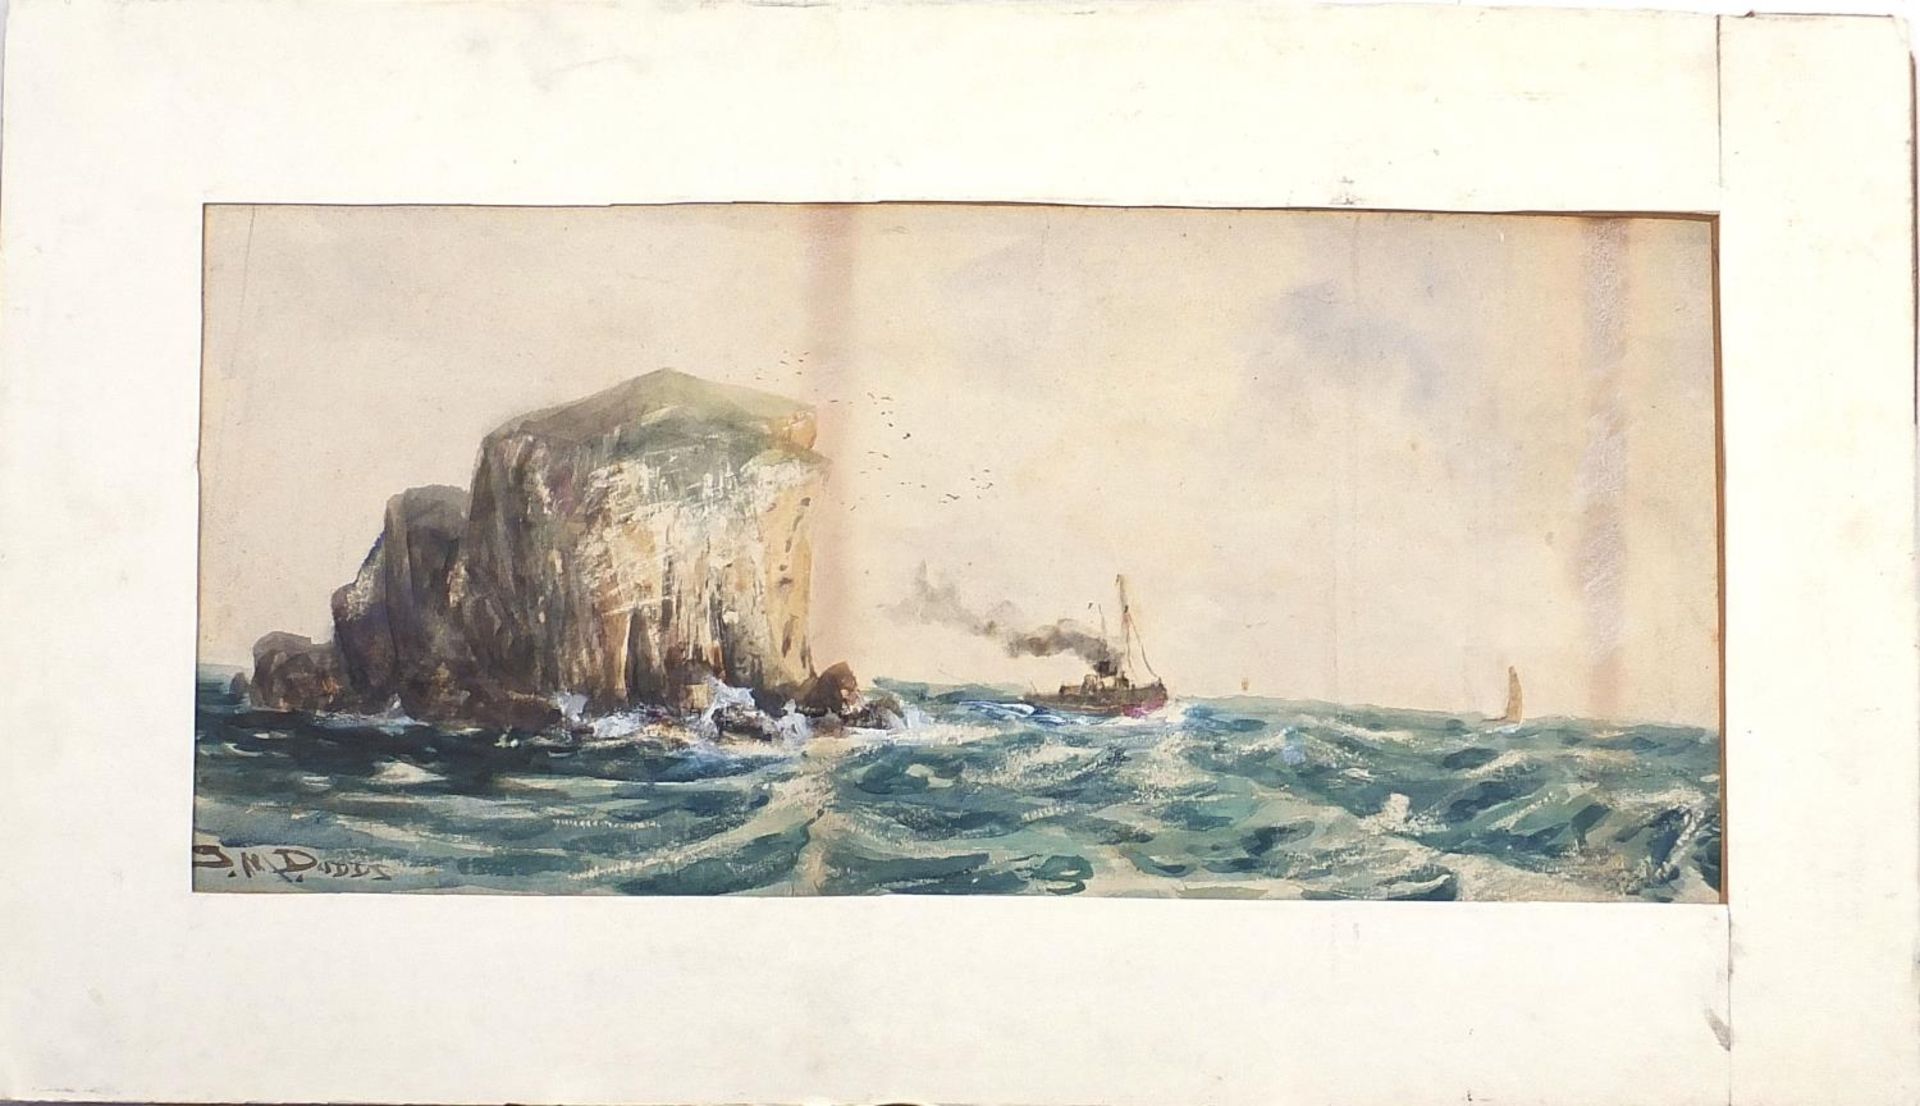 Boat on stormy seas, watercolour, signed J M Dodds, mounted, unframed, 50.5cm x 23cm excluding the - Image 2 of 6